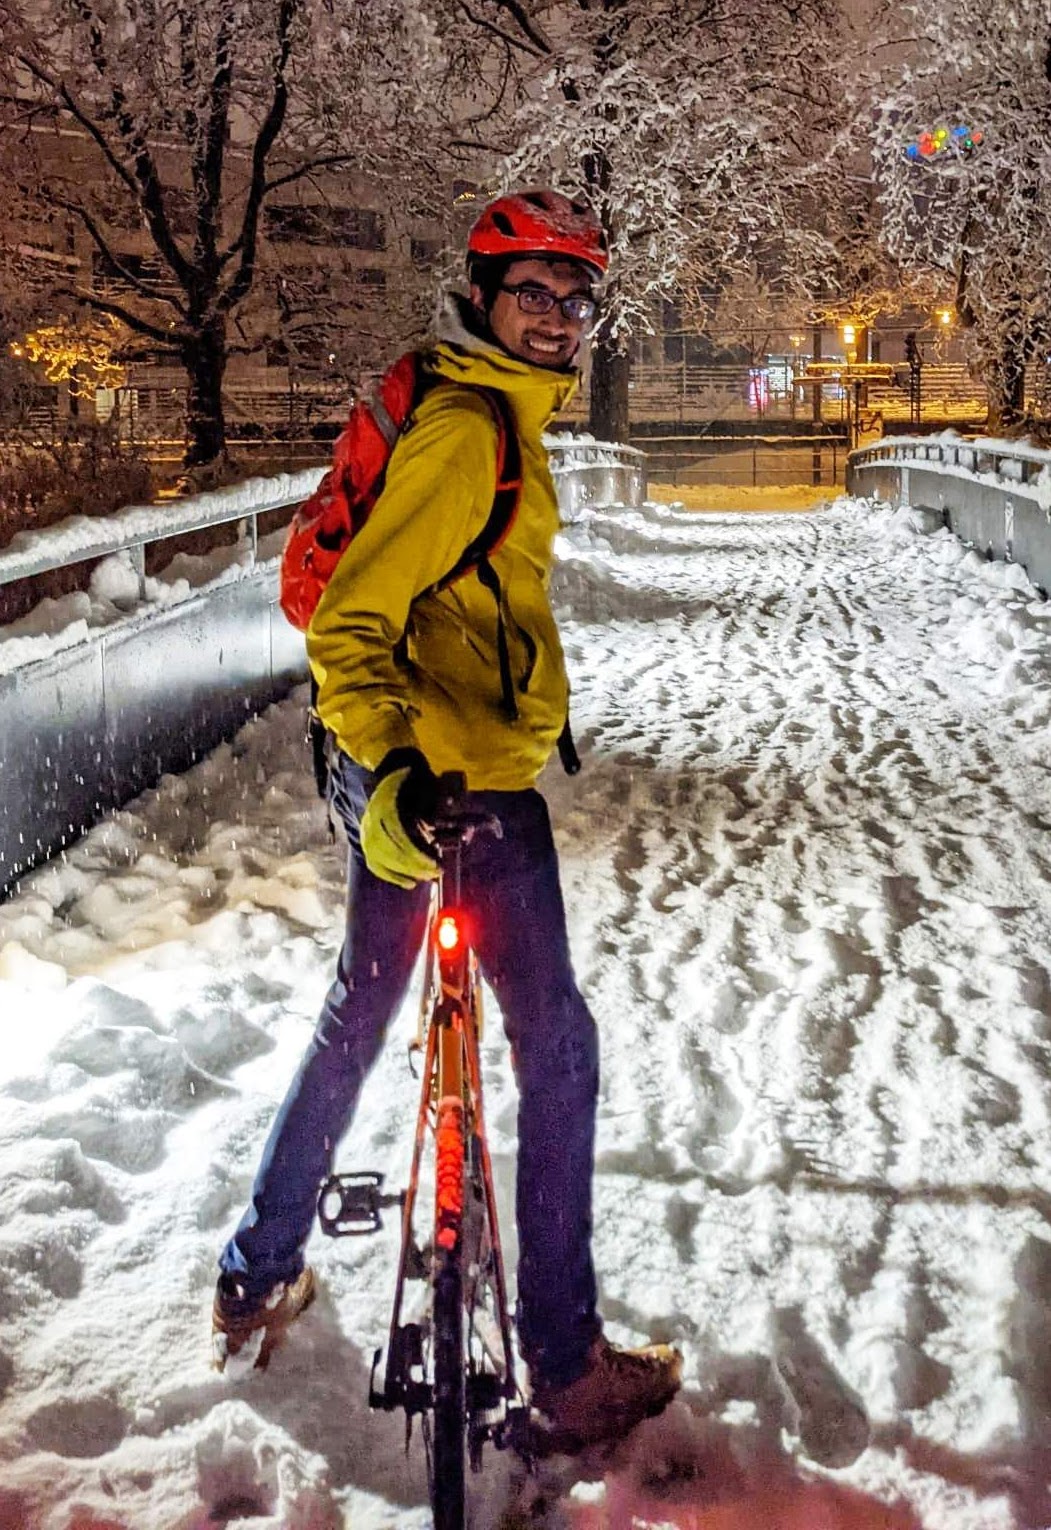 Using a road bike in the snow is not reccomended.